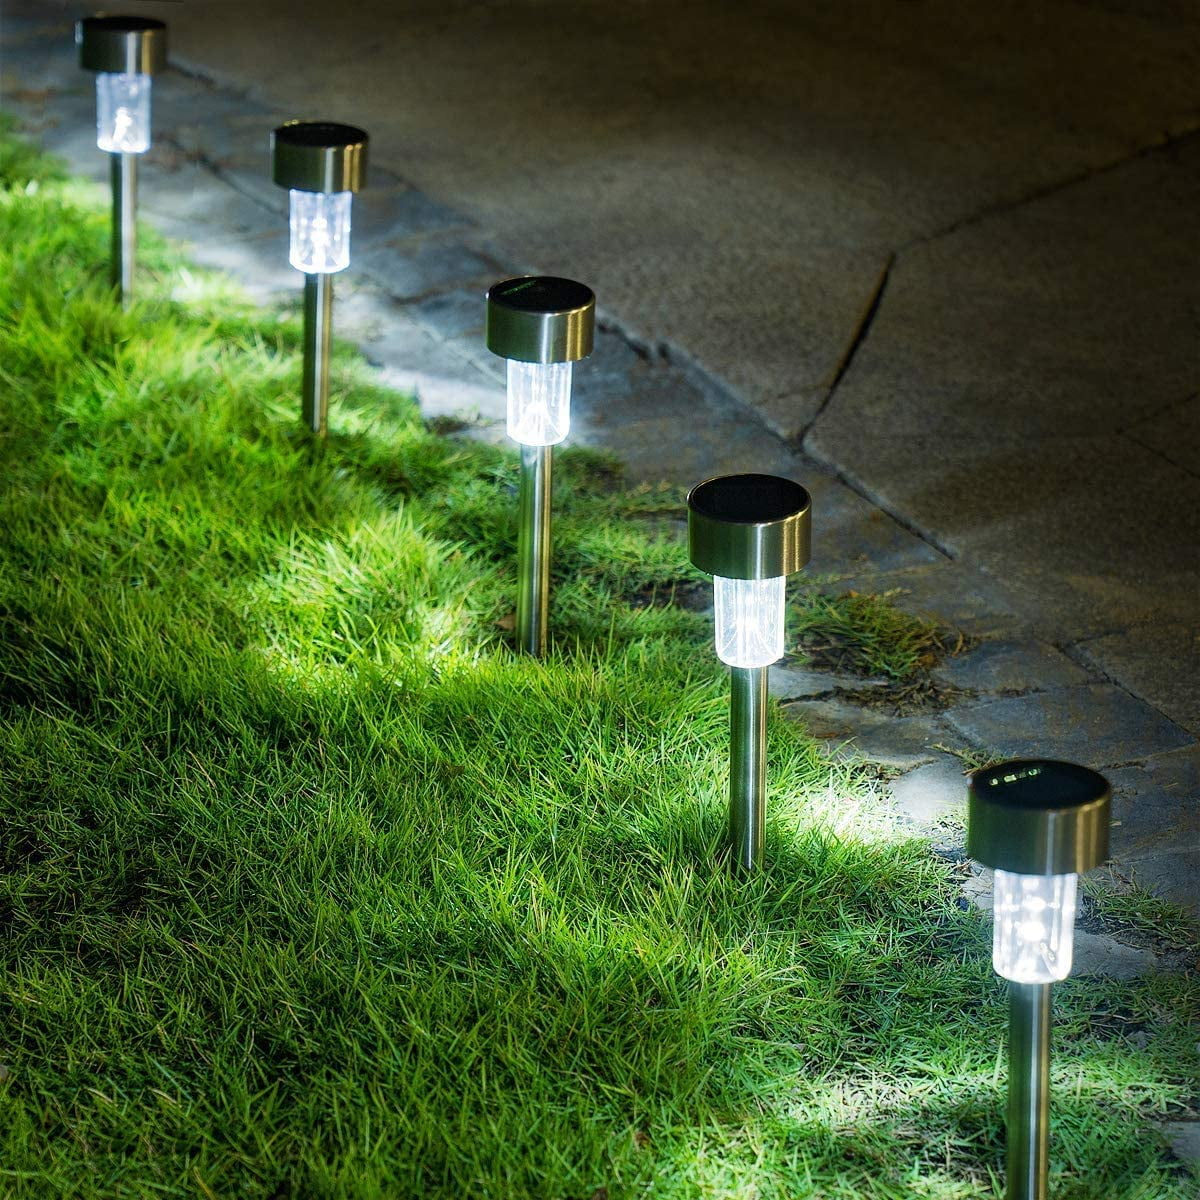 10x Outdoor LED Solar Torch Flame Dancing Light Garden Flickering Path Lawn Lamp